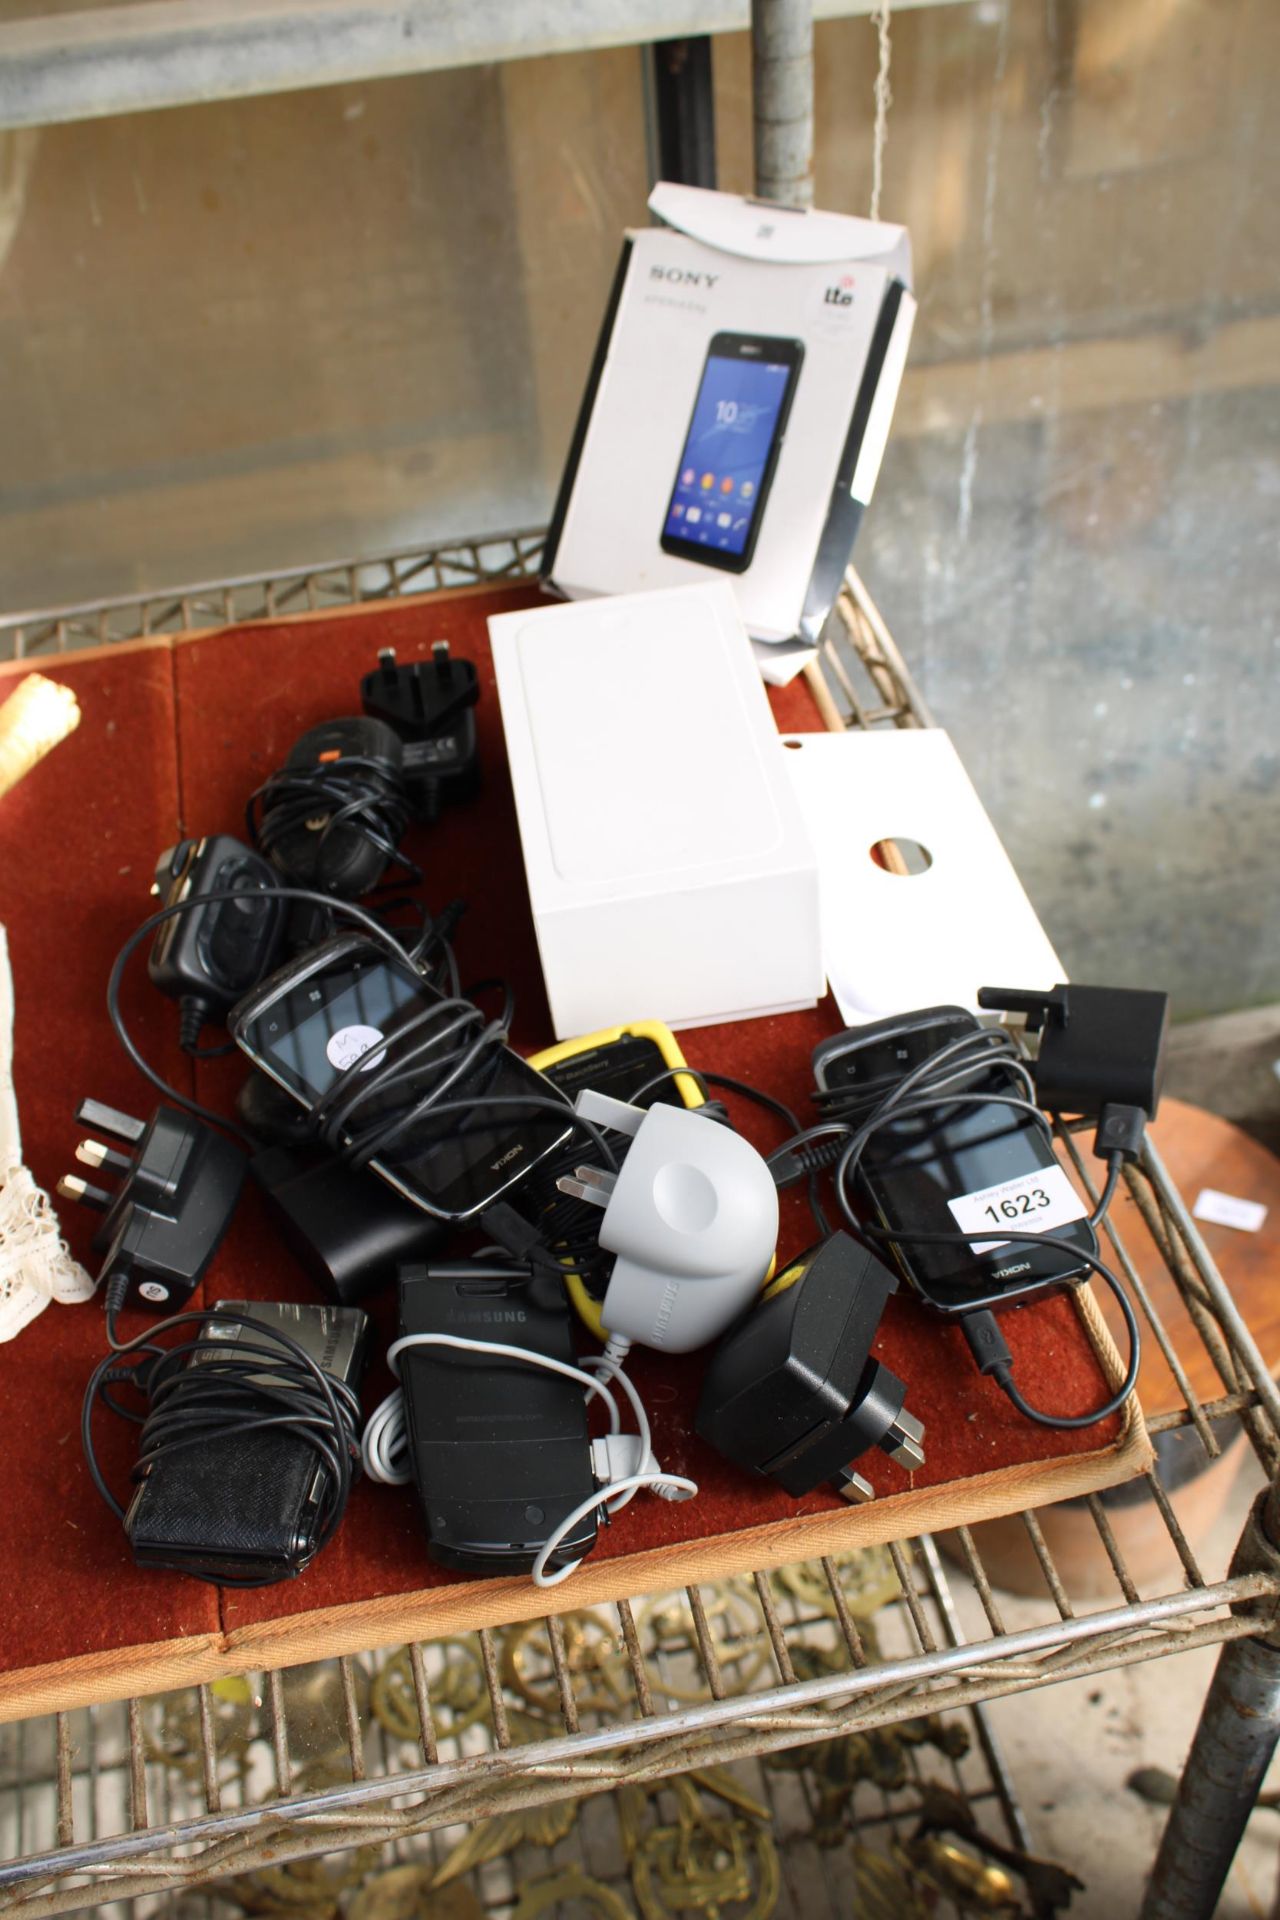 AN ASSORTMENT OF VARIOUS MOBILE PHONES AND CHARGERS